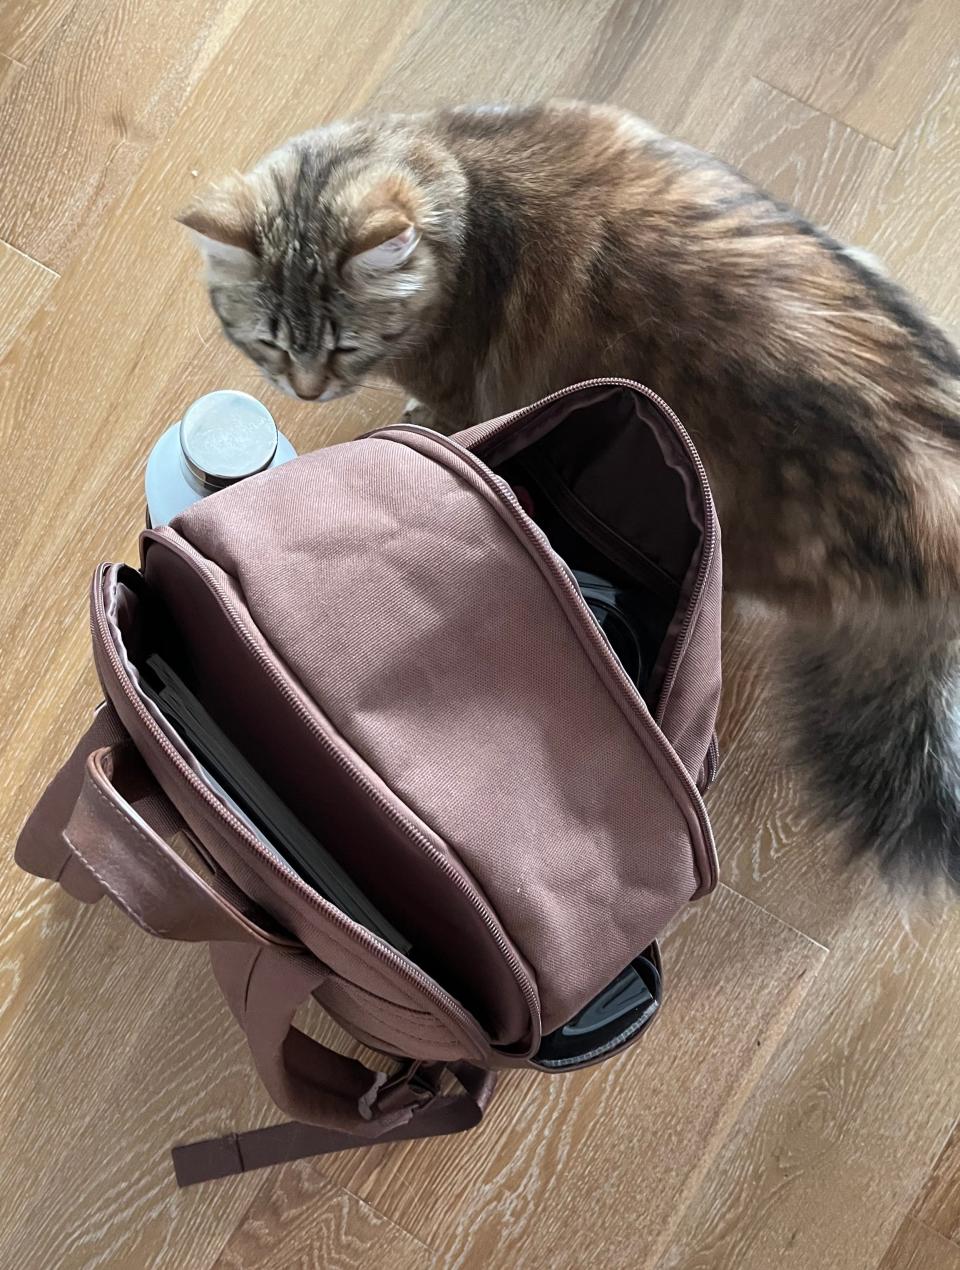 A brown fluffy cat encircling a brown backpack.